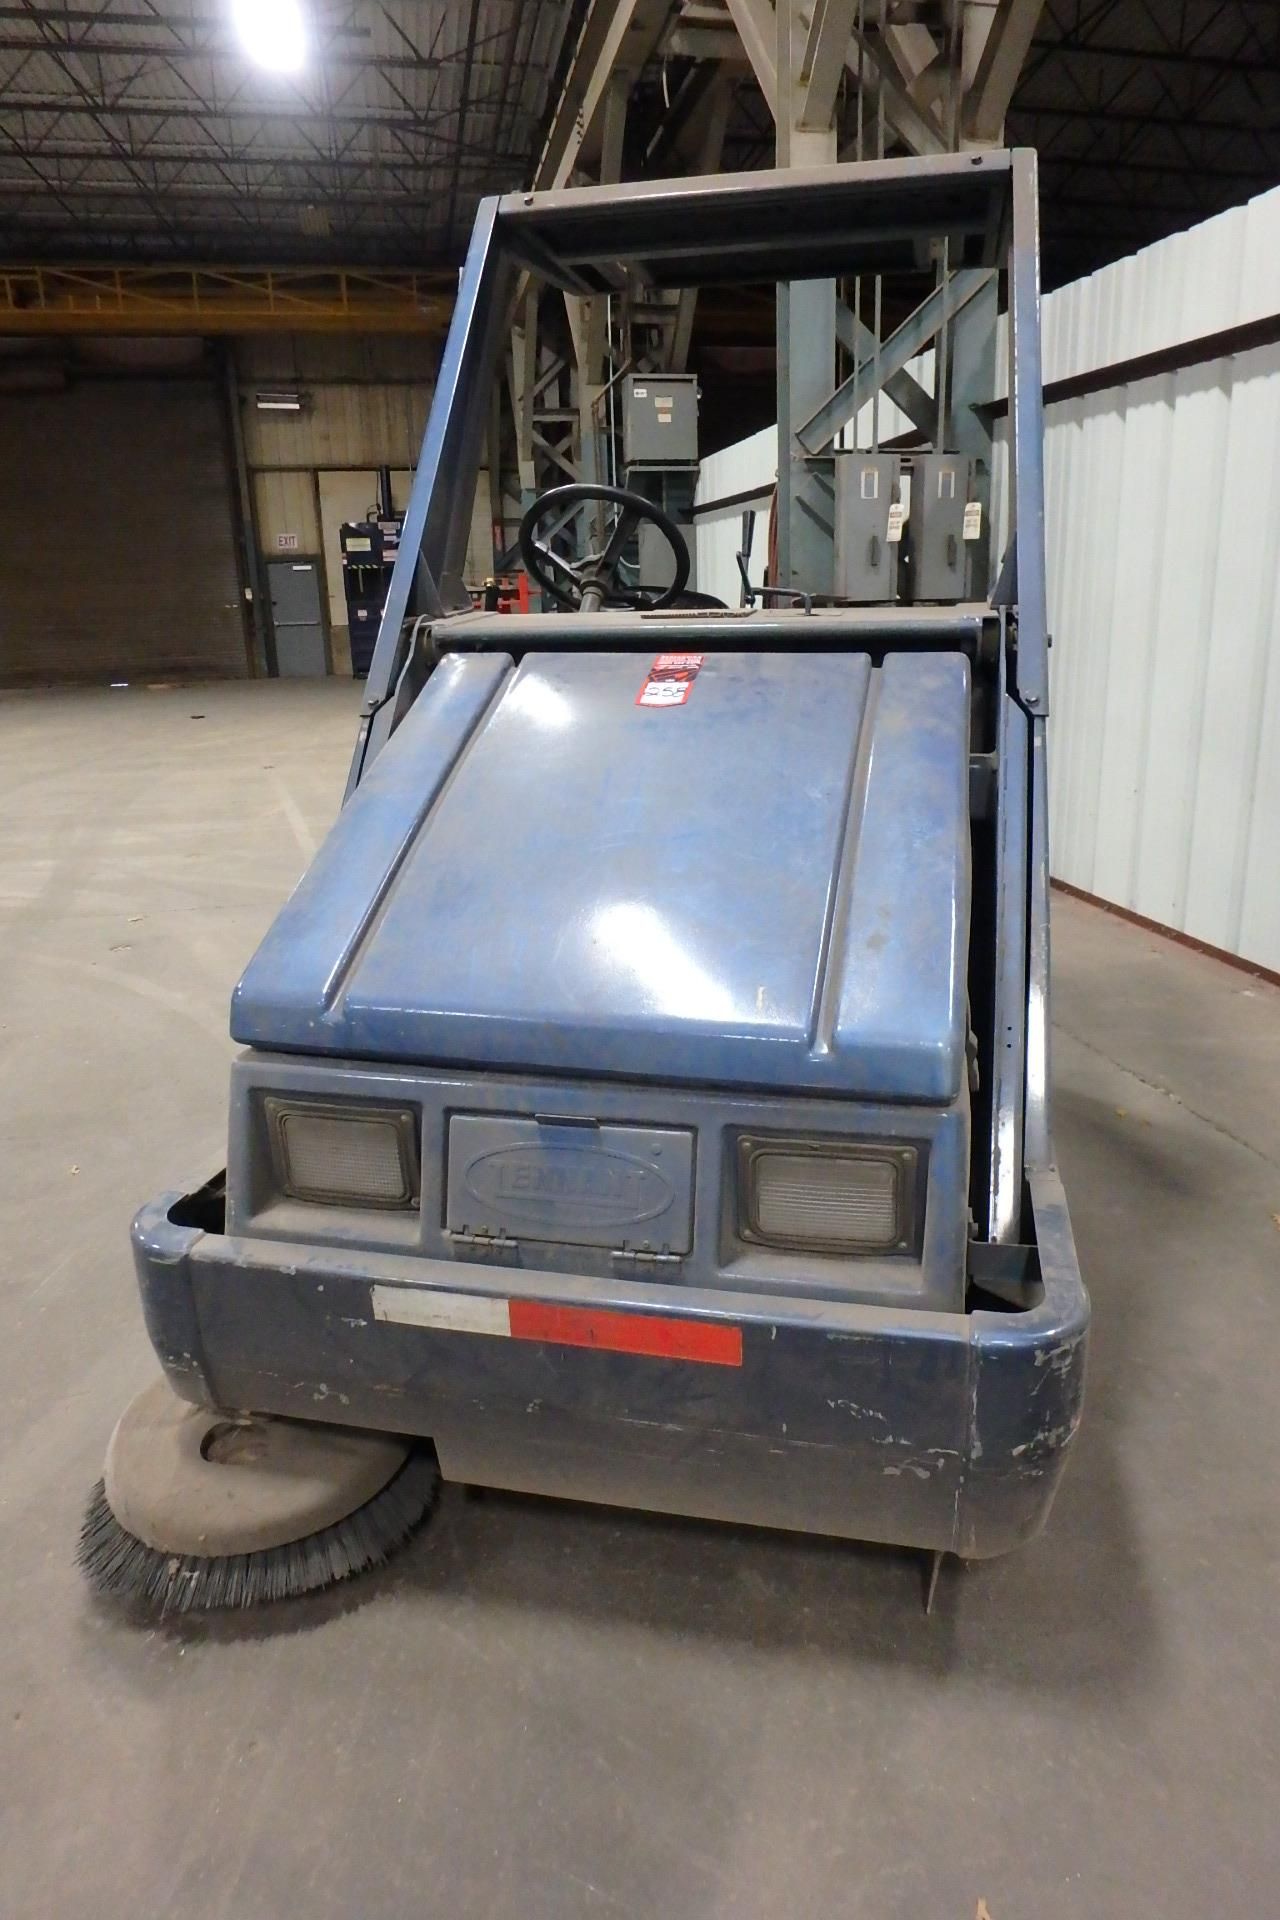 TENNANT 6400 Electric Power Sweeper, s/n 6400-3698, Approximate Hours: 2,990 - Image 2 of 4